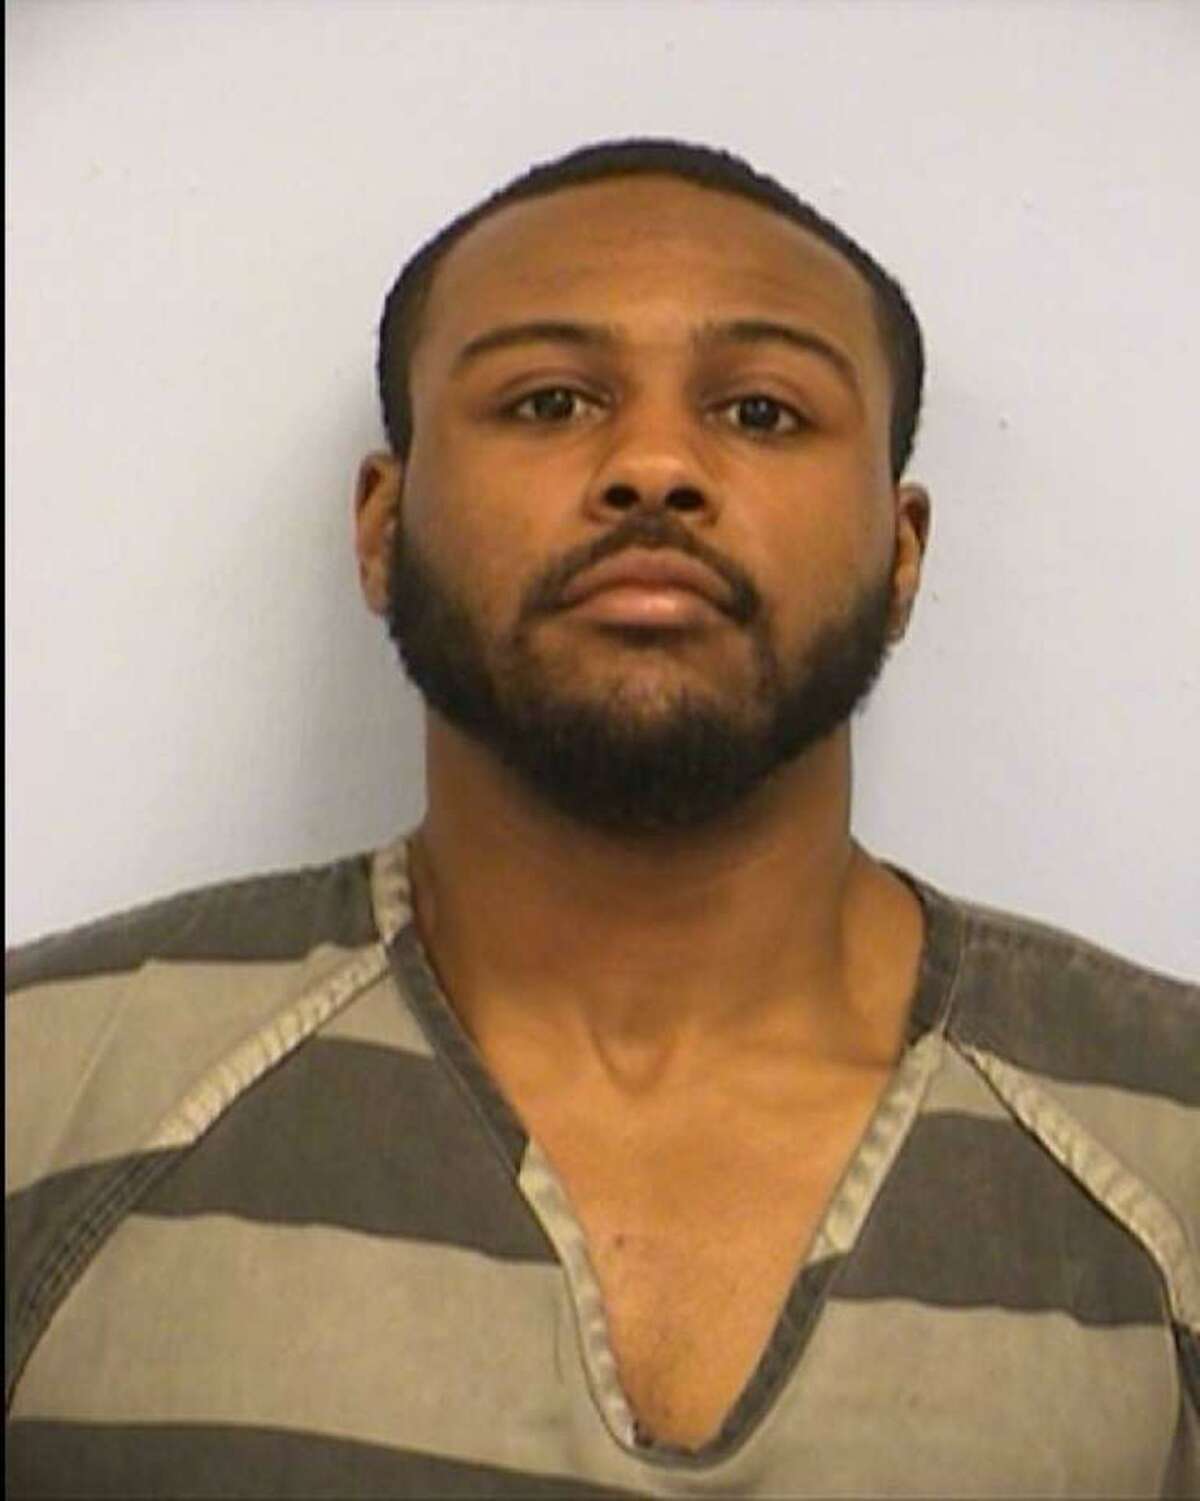 Austin Police Department released the mug shot of UT stabbing suspect Kendrix White after he was charged with murder, May 2, 2017